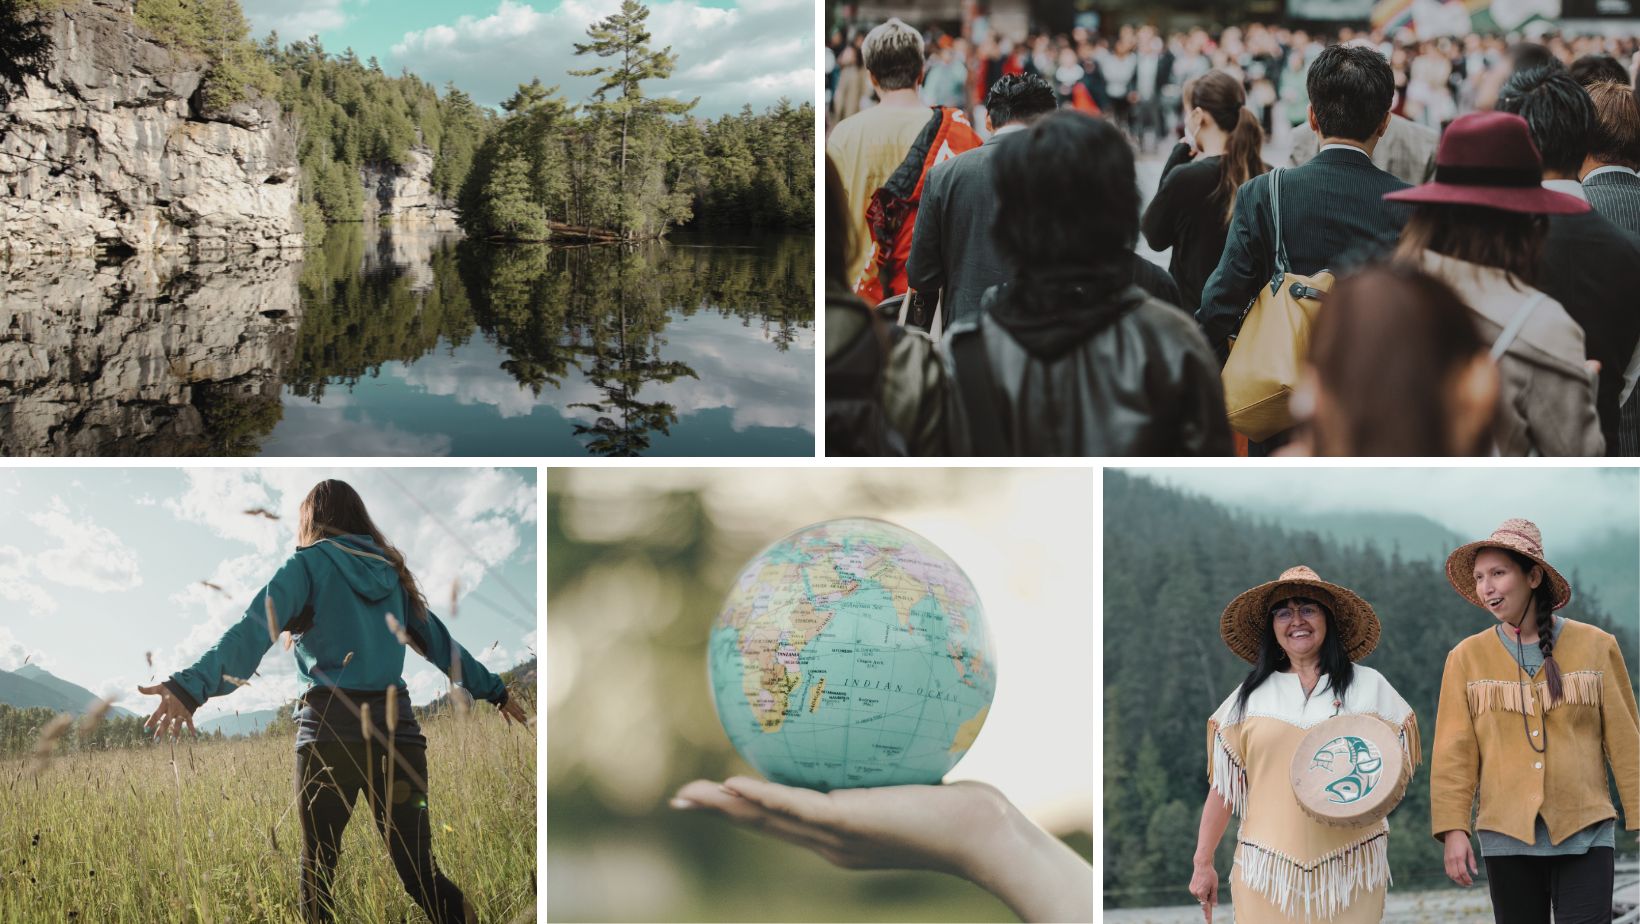 Top left: A serene landscape of a lake and forest bathed in sunlight on a sunny day. Top right: Busy city streets filled with citizens walking, seen from behind. Bottom left: A person with long brown hair and outstretched arms walks through tall grass in a field with mountains in the background. Bottom middle: A hand holding a globe ball against a backdrop of nature. Bottom right: Two indigenous people in traditional clothing, one holding a leather-bound drum, engaged in conversation with mountains and forests in the background.